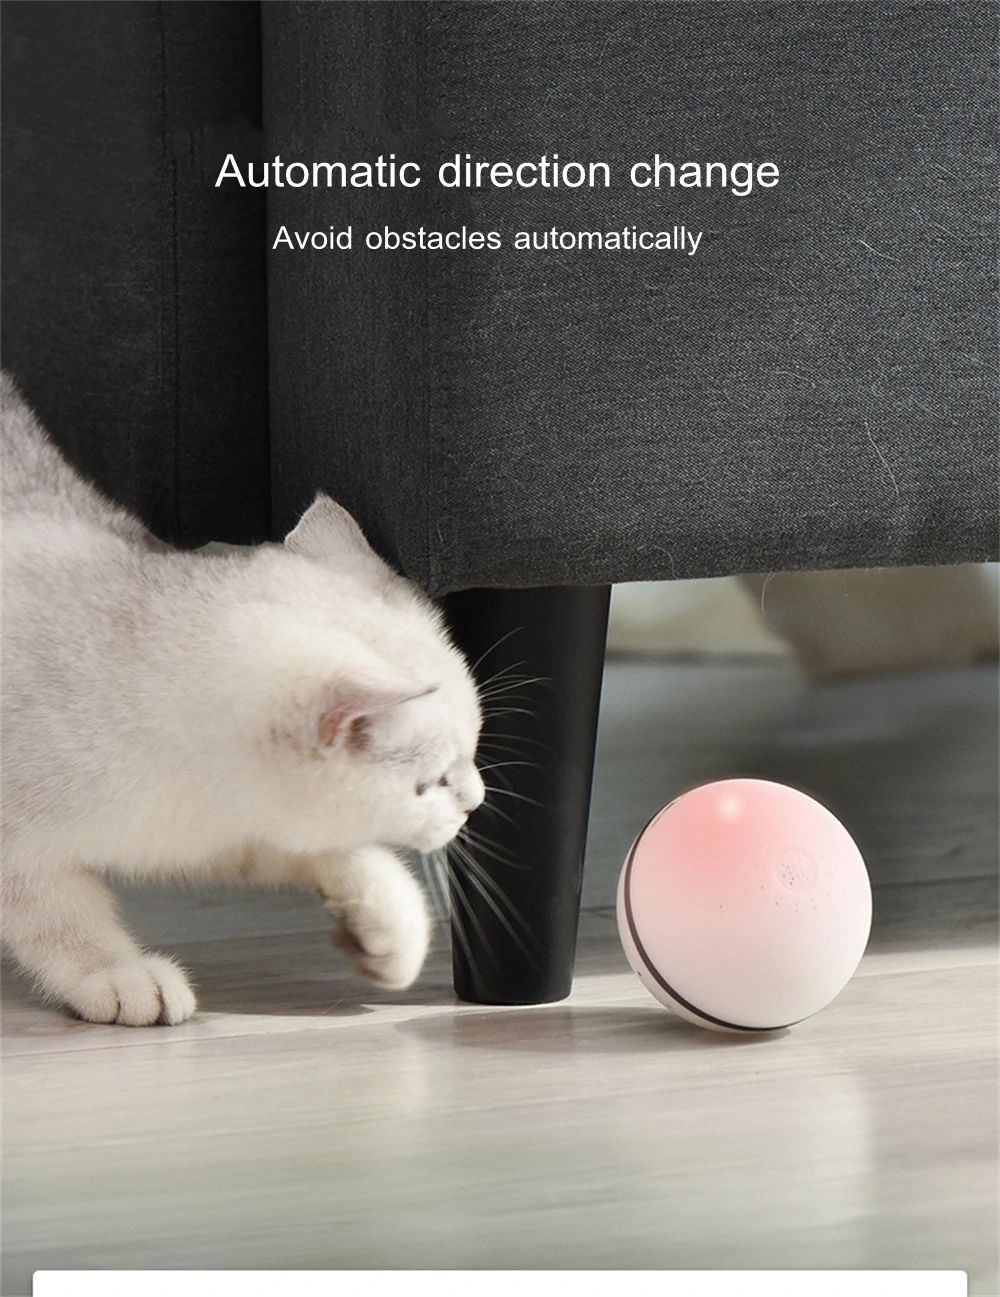 DOGNESS Cat Automatic LED Flash Rolling Ball Glowing Ball with Automatic Direction Change Design - Pink